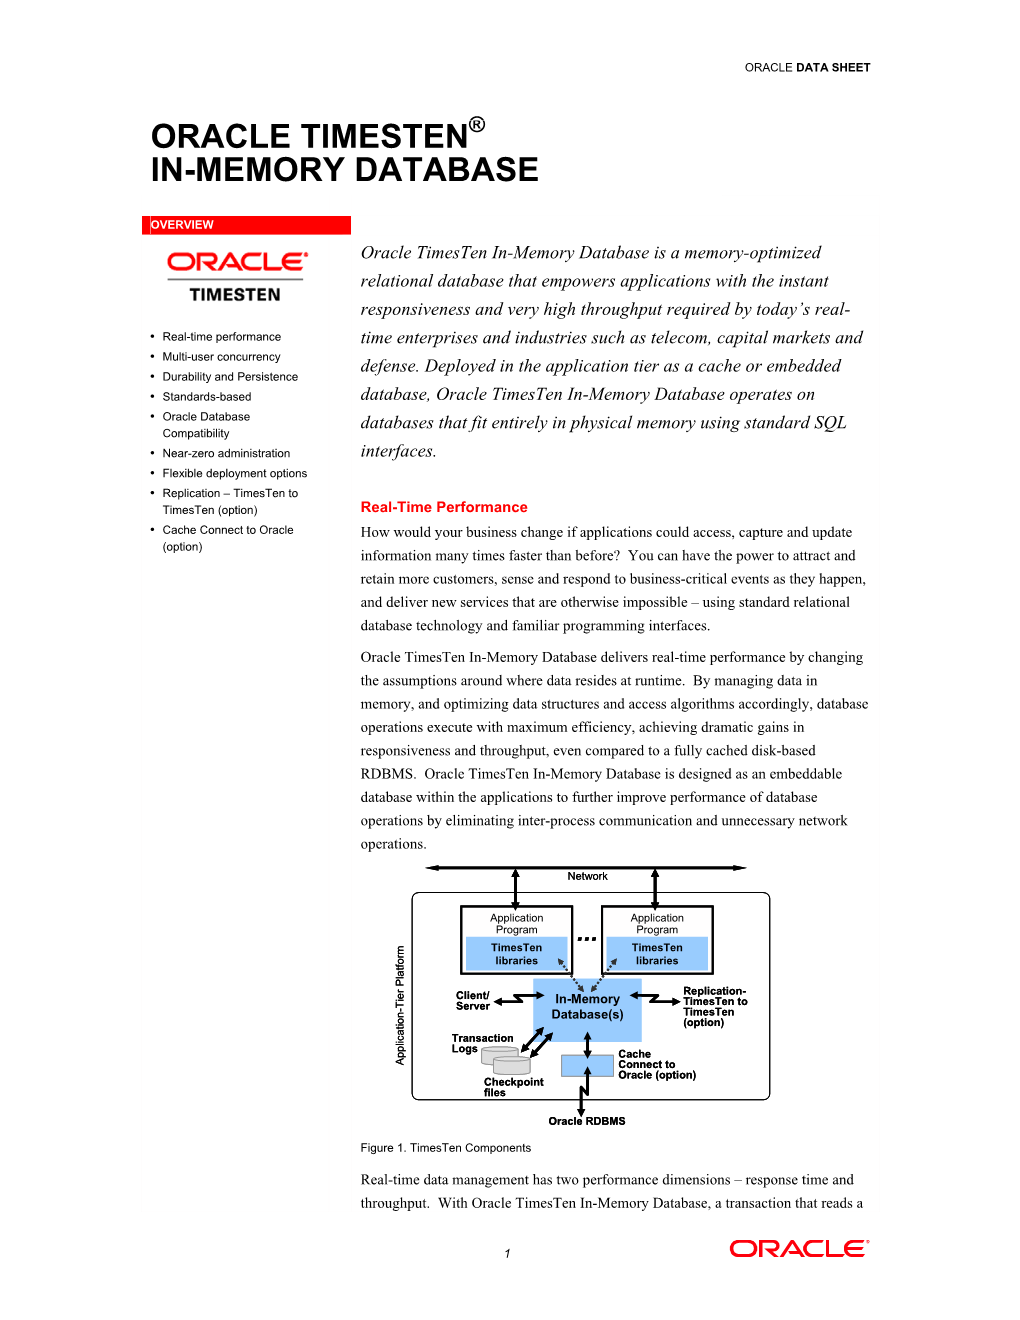 Oracle Timesten In-Memory Database Is a Memory-Optimized Relational Database That Empowers Applications with the Instant